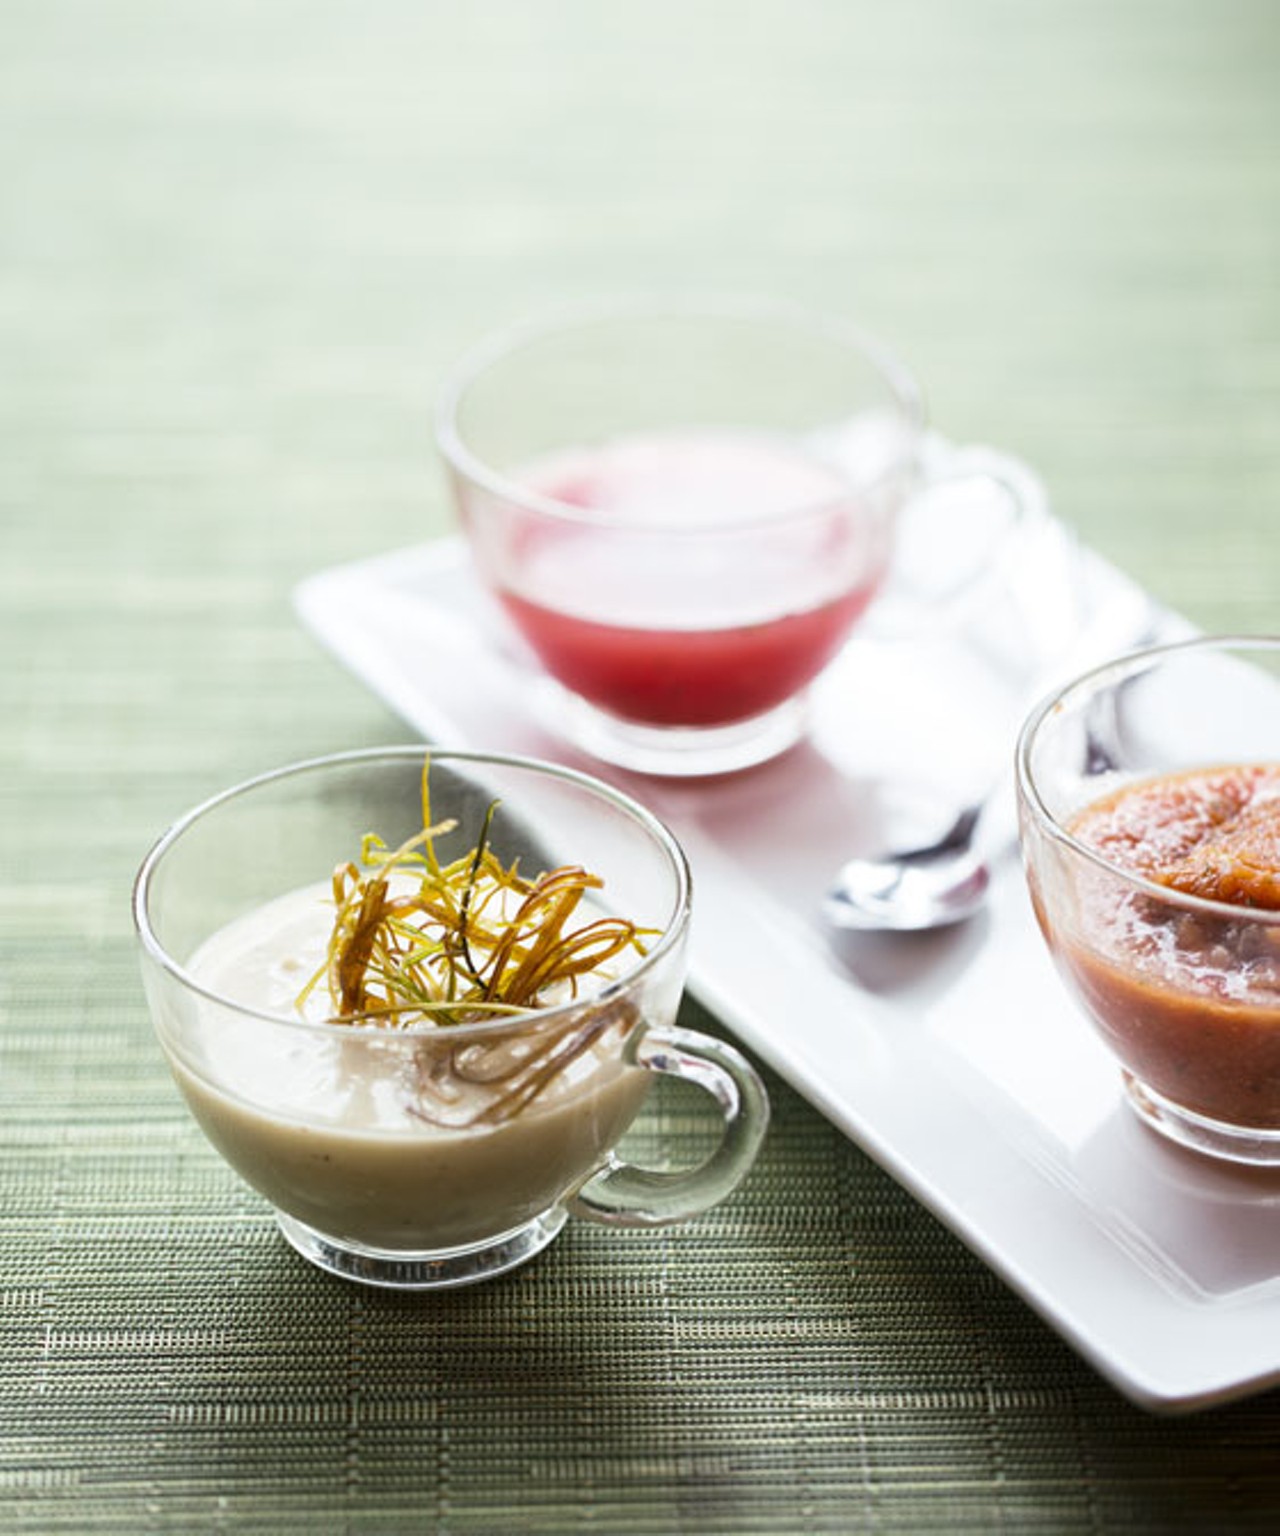 Bocci's flight of chilled soups includes vichyssoise, gazpacho, and watermelon and mint.